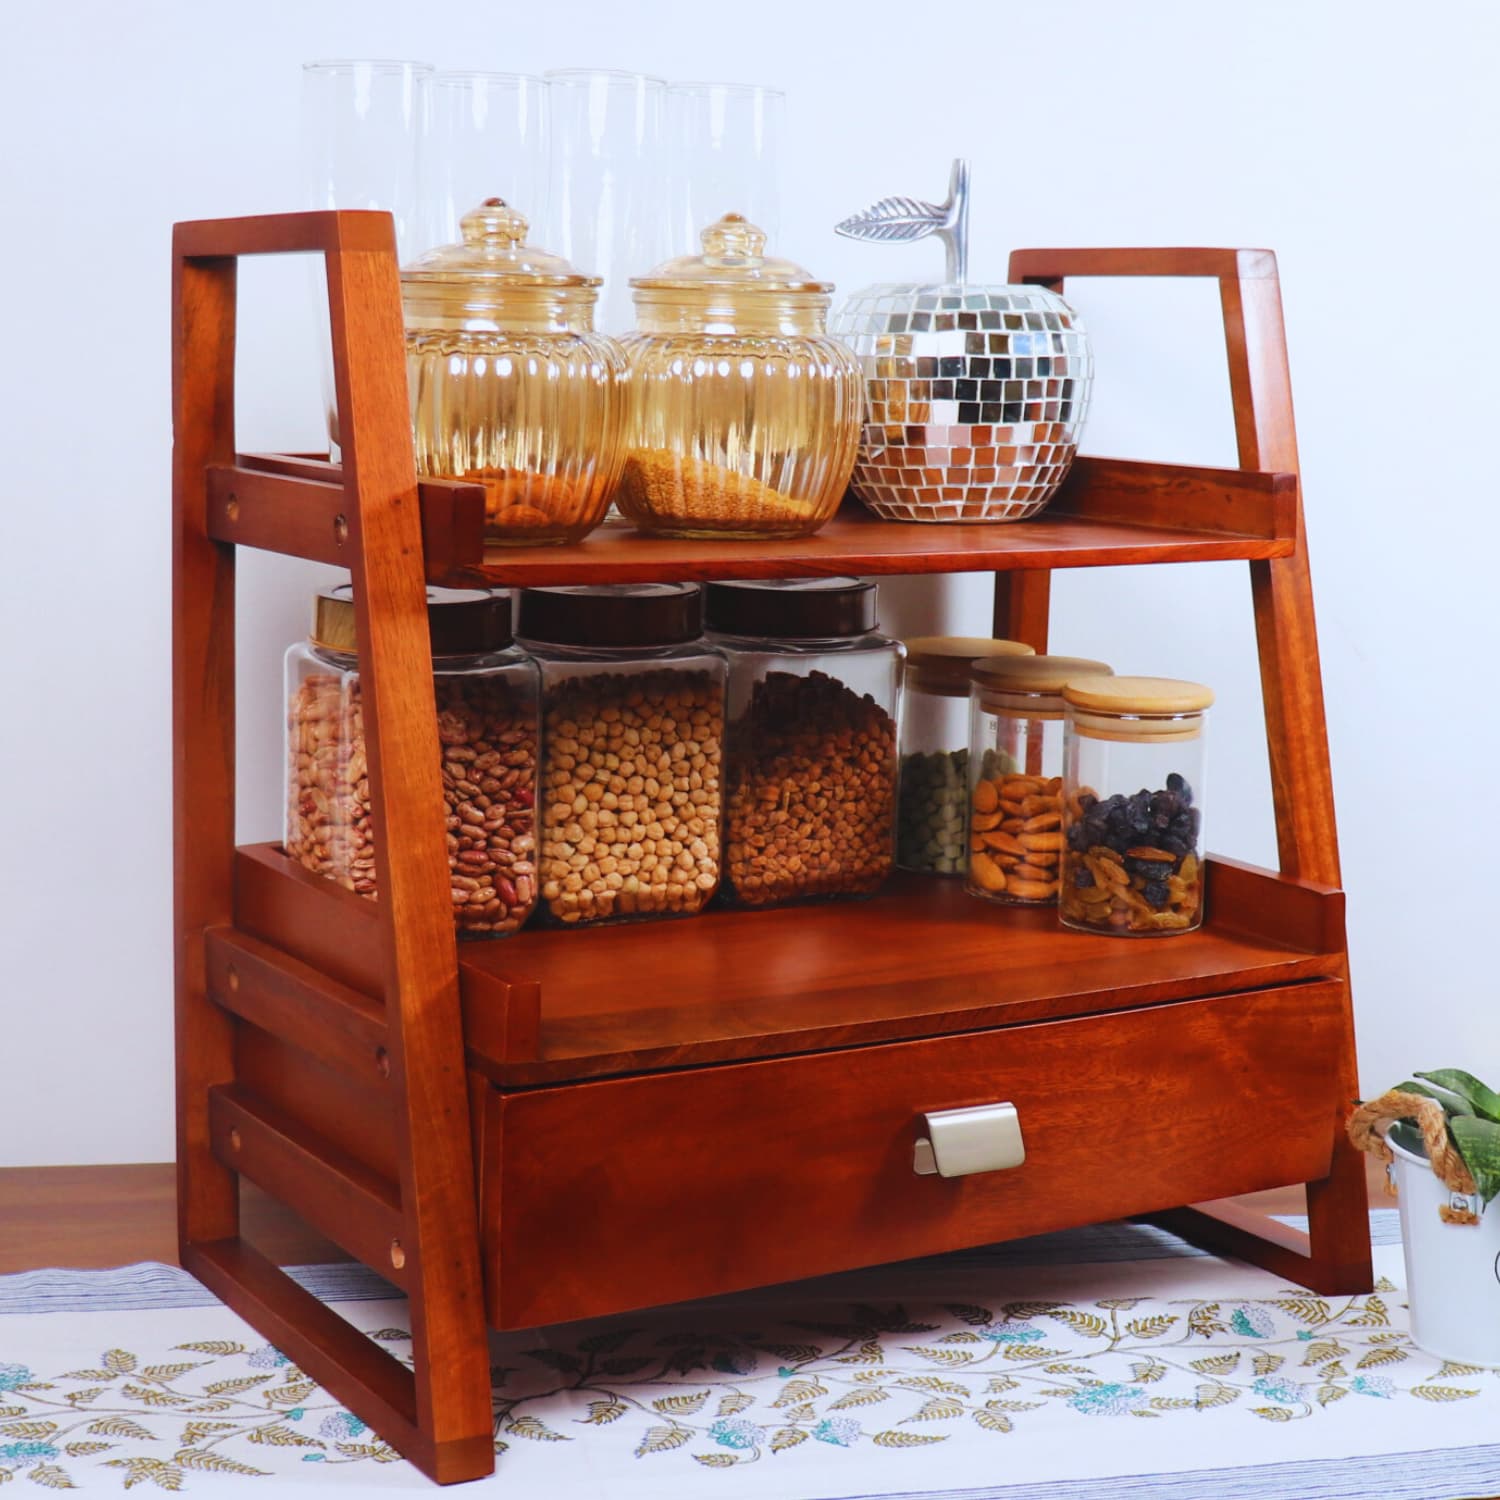 The LOOSEBUCKET Terra Manilla Wooden Kitchen Versatile Organizer with a vintage design features two shelves holding various jars filled with grains and legumes. The top shelf has glass jars, while the middle shelf contains jars with wooden and metal lids. Below is a drawer with a silver handle.